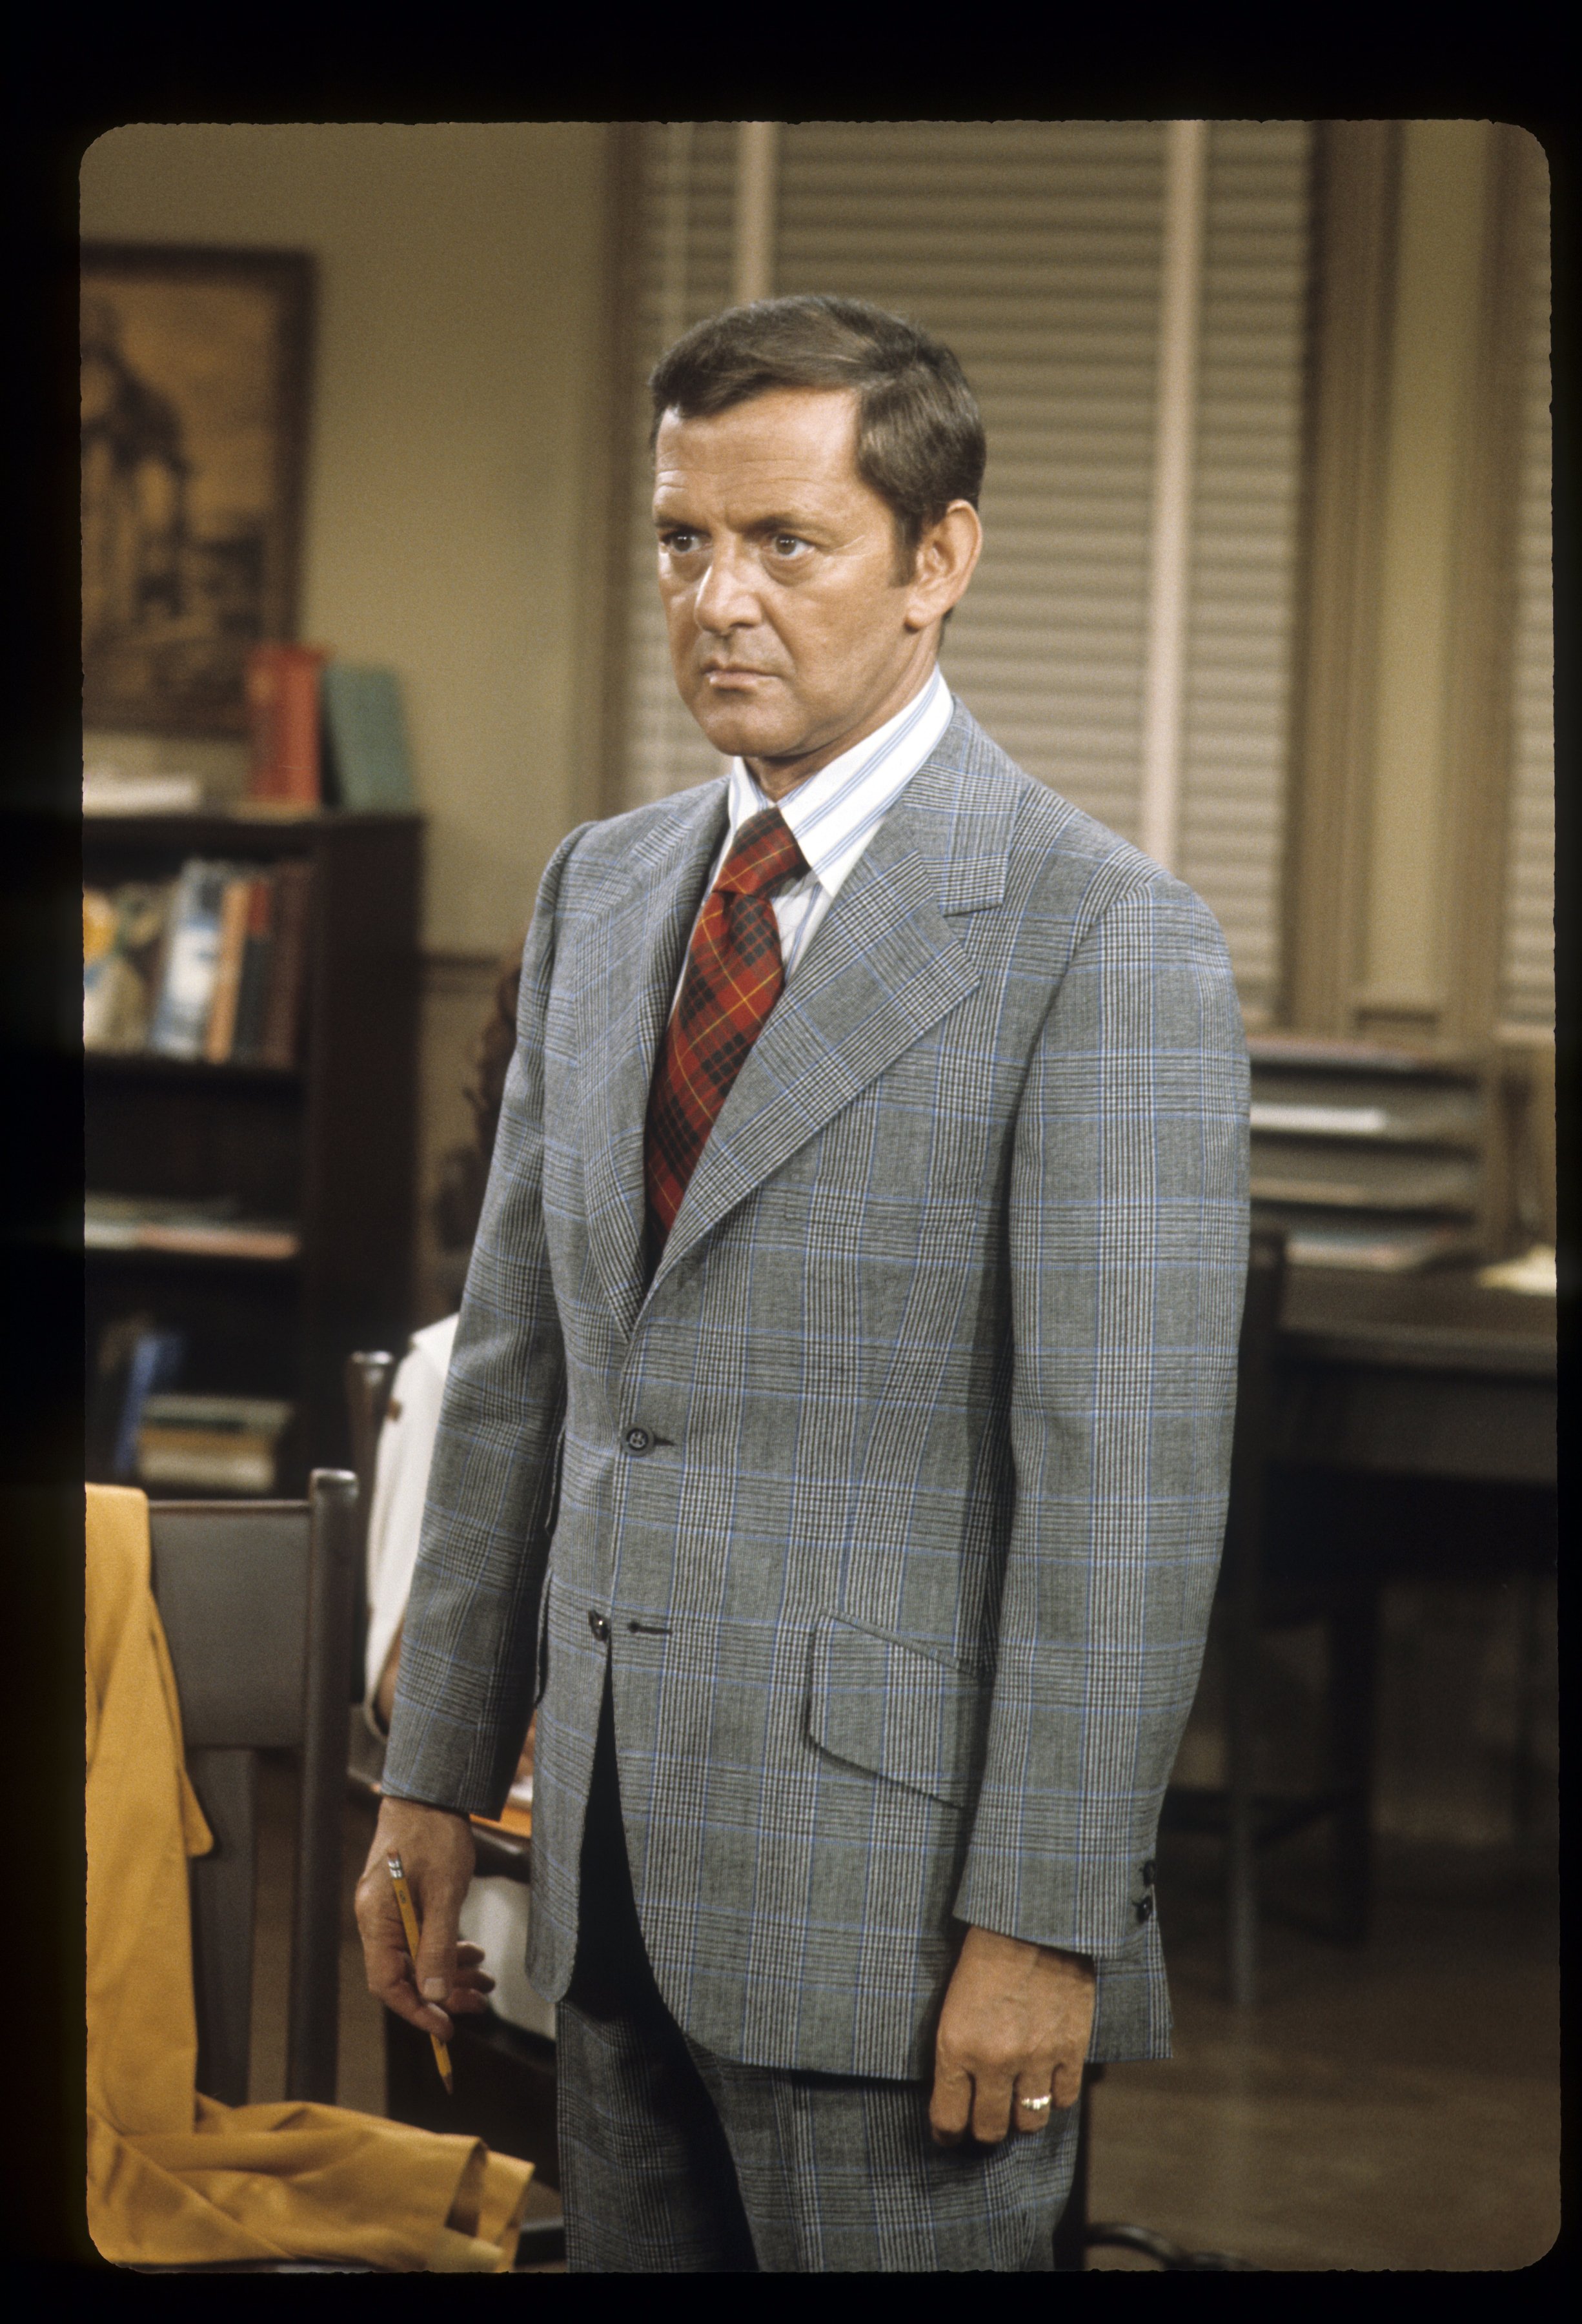 Late actor and comedian Tony Randall on "The Odd Couple" on December 6, 1972 | Photo: Getty Images